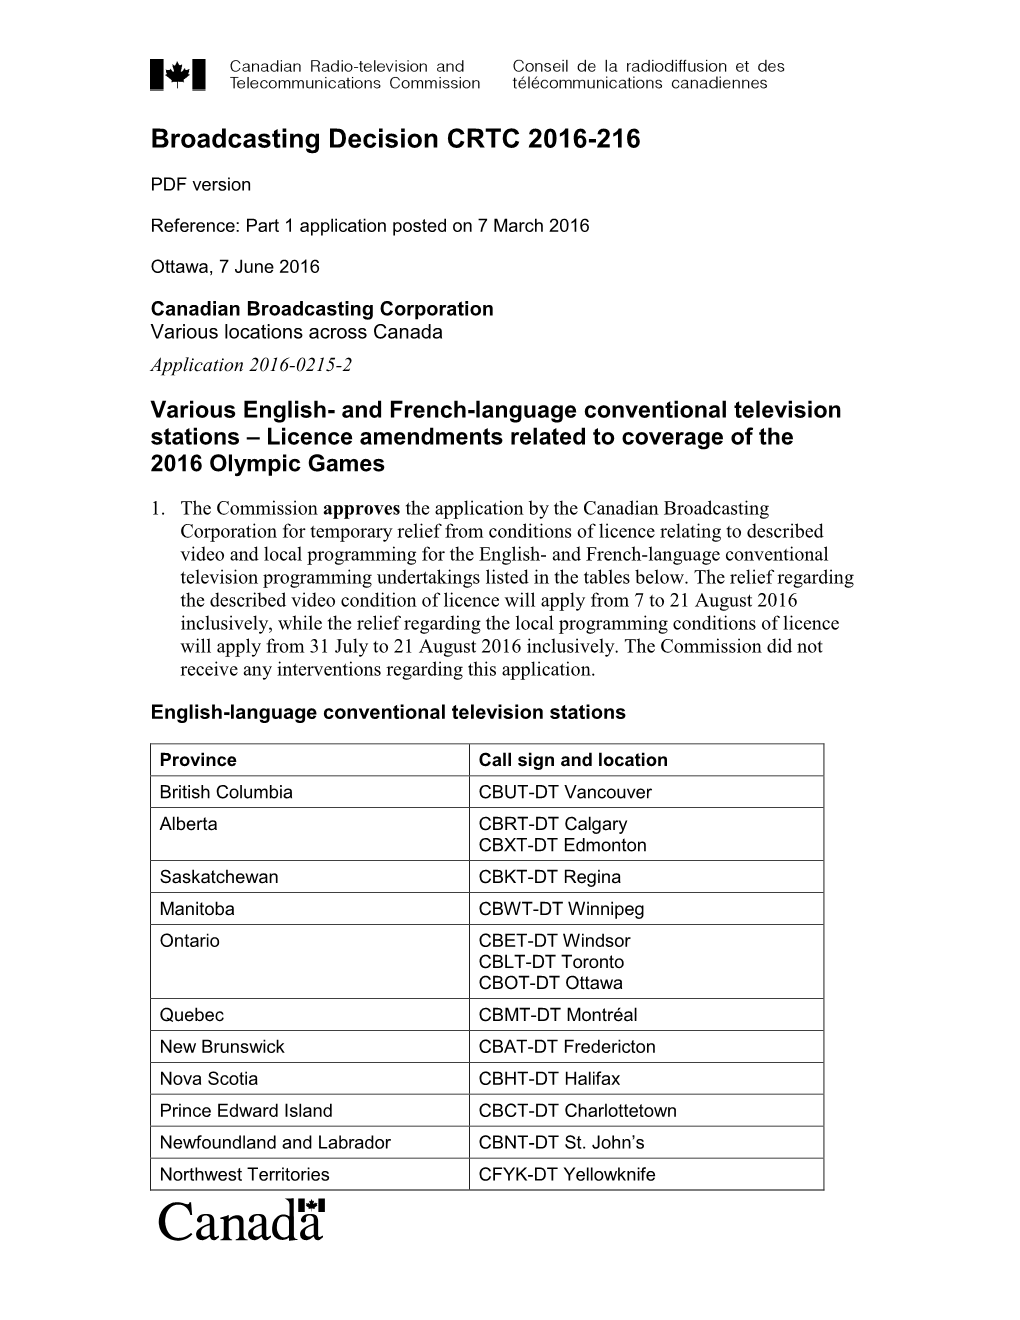 Various English- and French-Language Conventional Television Stations – Licence Amendments Related to Coverage of the 2016 Olympic Games